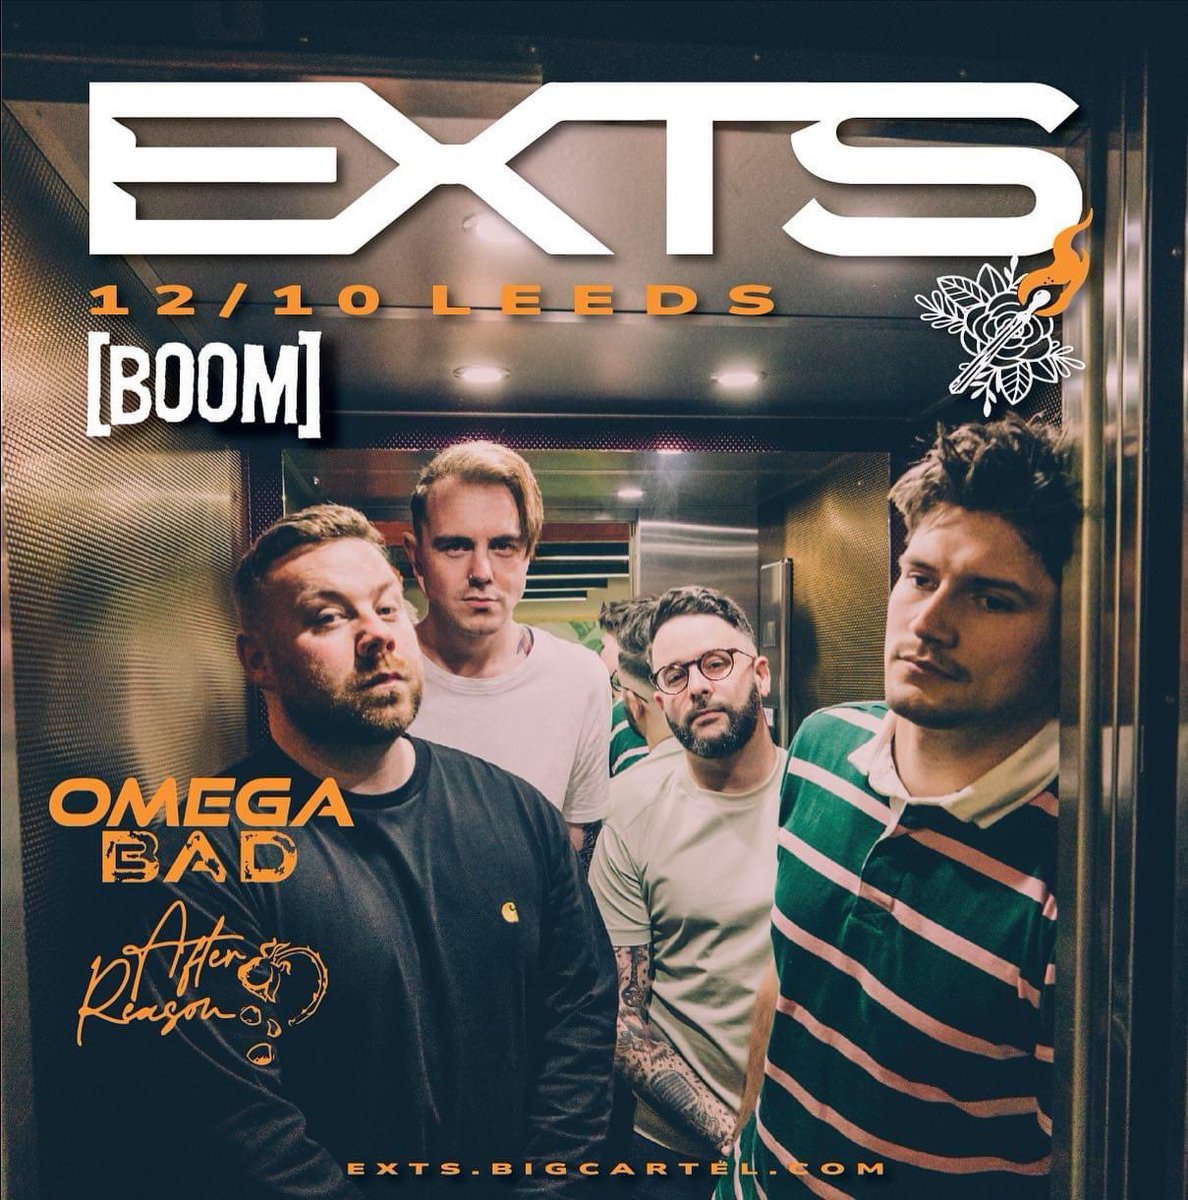 **Ticket Update** We’re only here for a good time - so why charge when you don’t have to? Our next show at Boom is now FREE ENTRY - so you’ve no excuses. Joining us will be @omegabadband and @afterreasonuk on a rotating headline weekender.